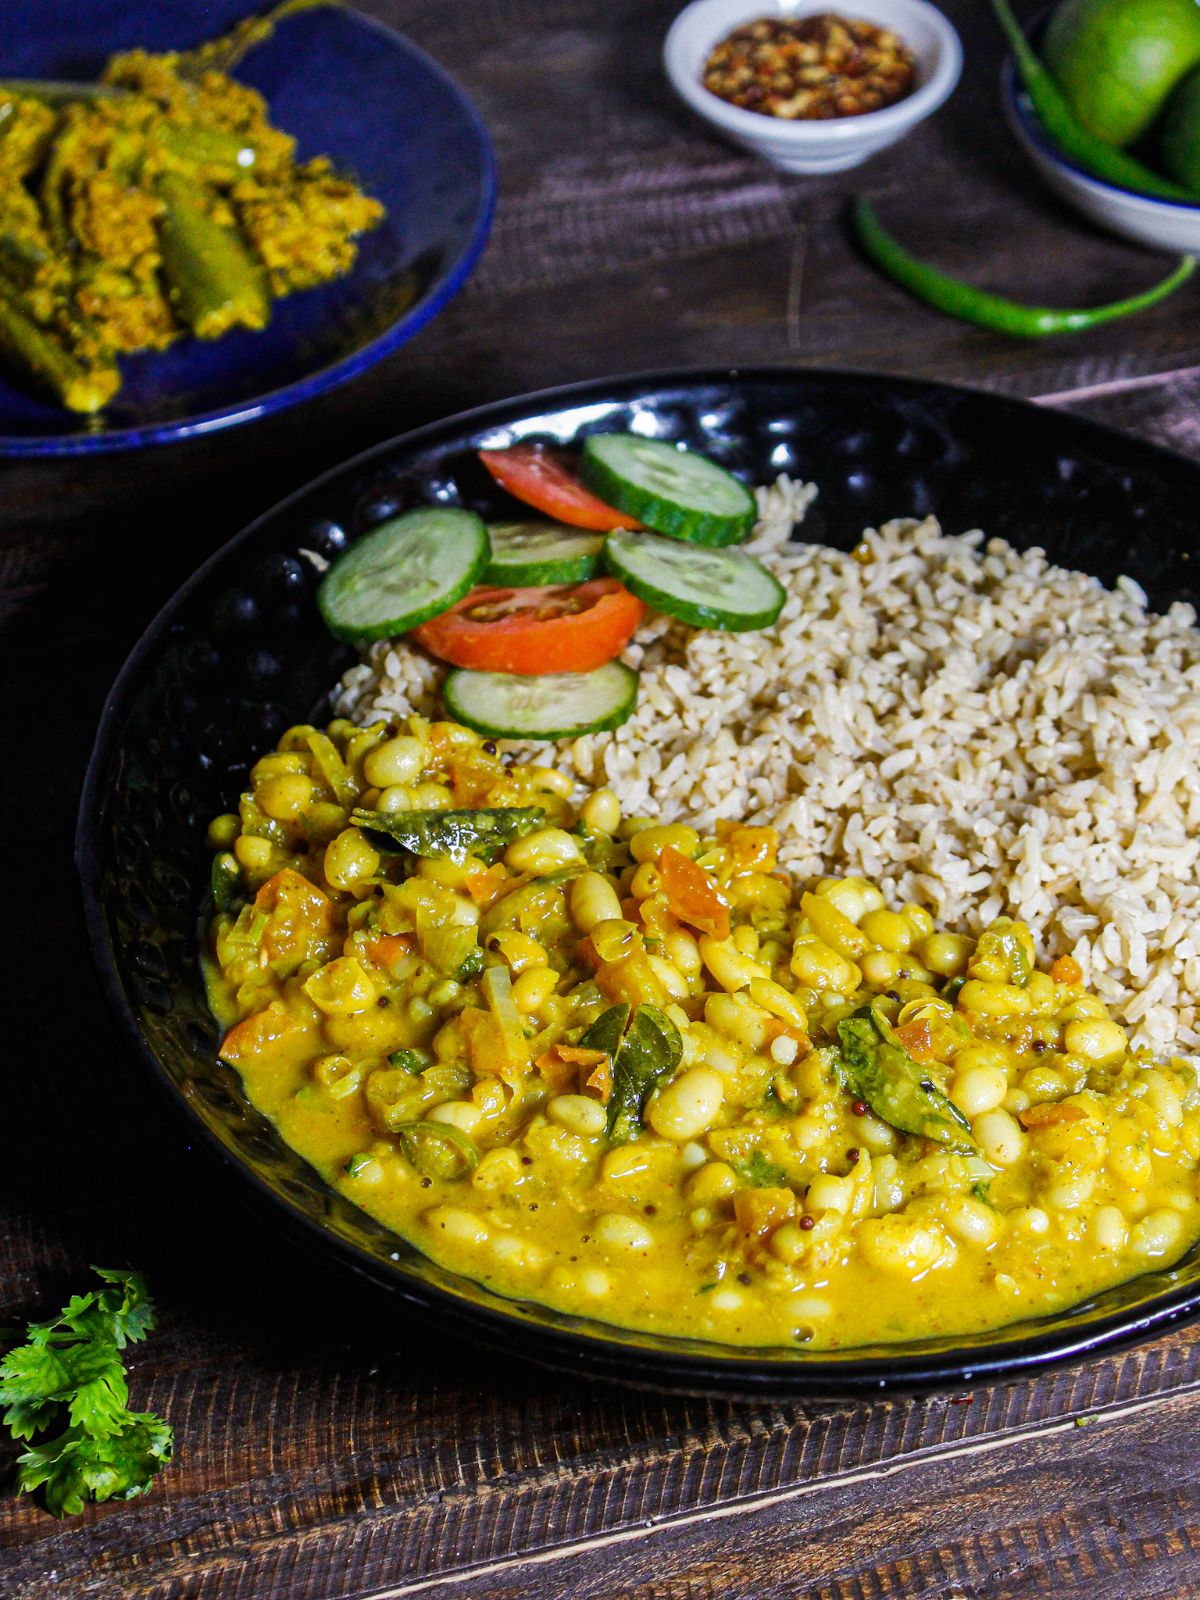 Enjoy Soyabean Curry with Brown Rice and salad 